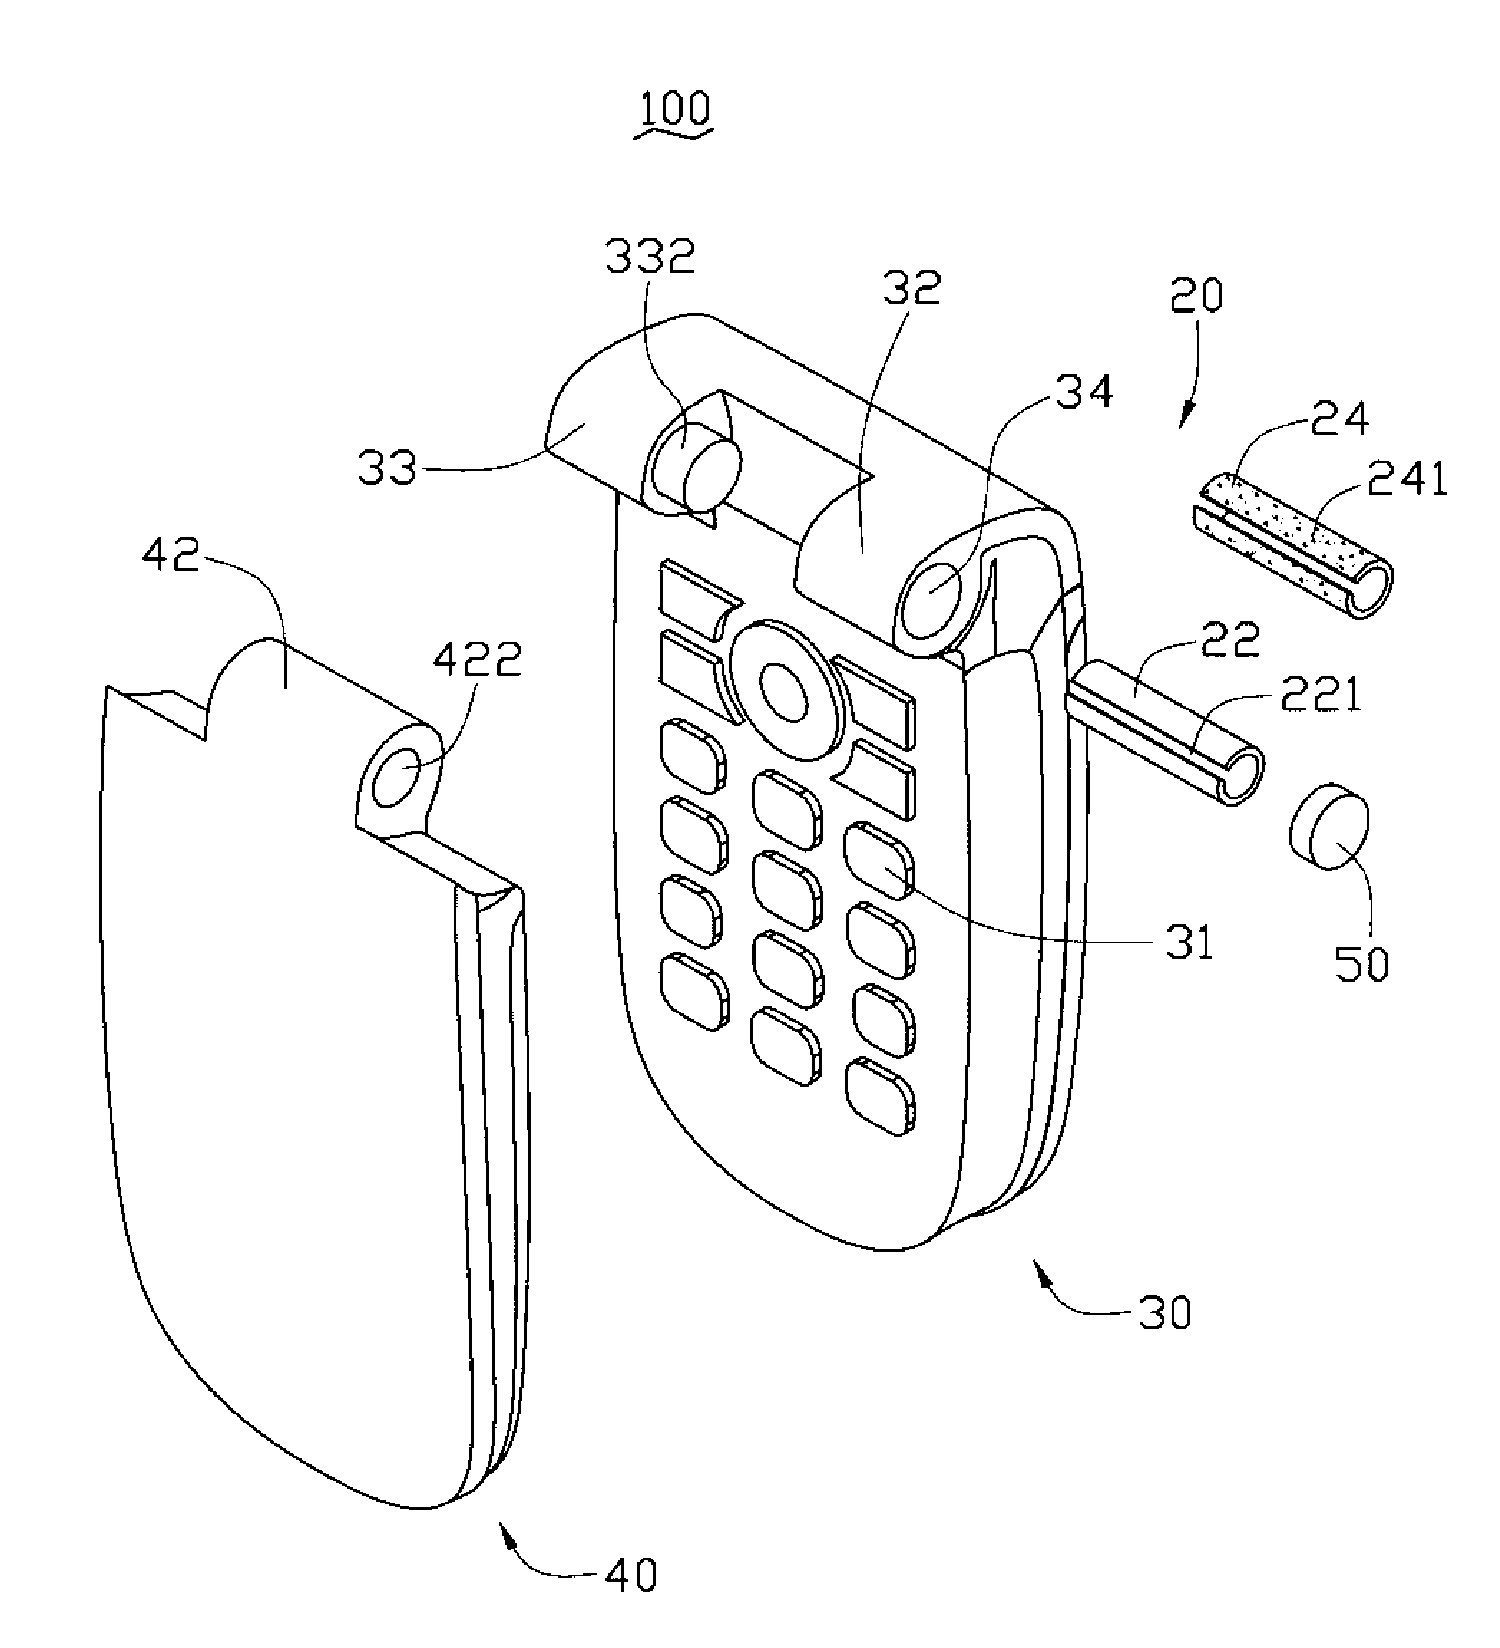 Hinge sleeve and portable electronic device using same